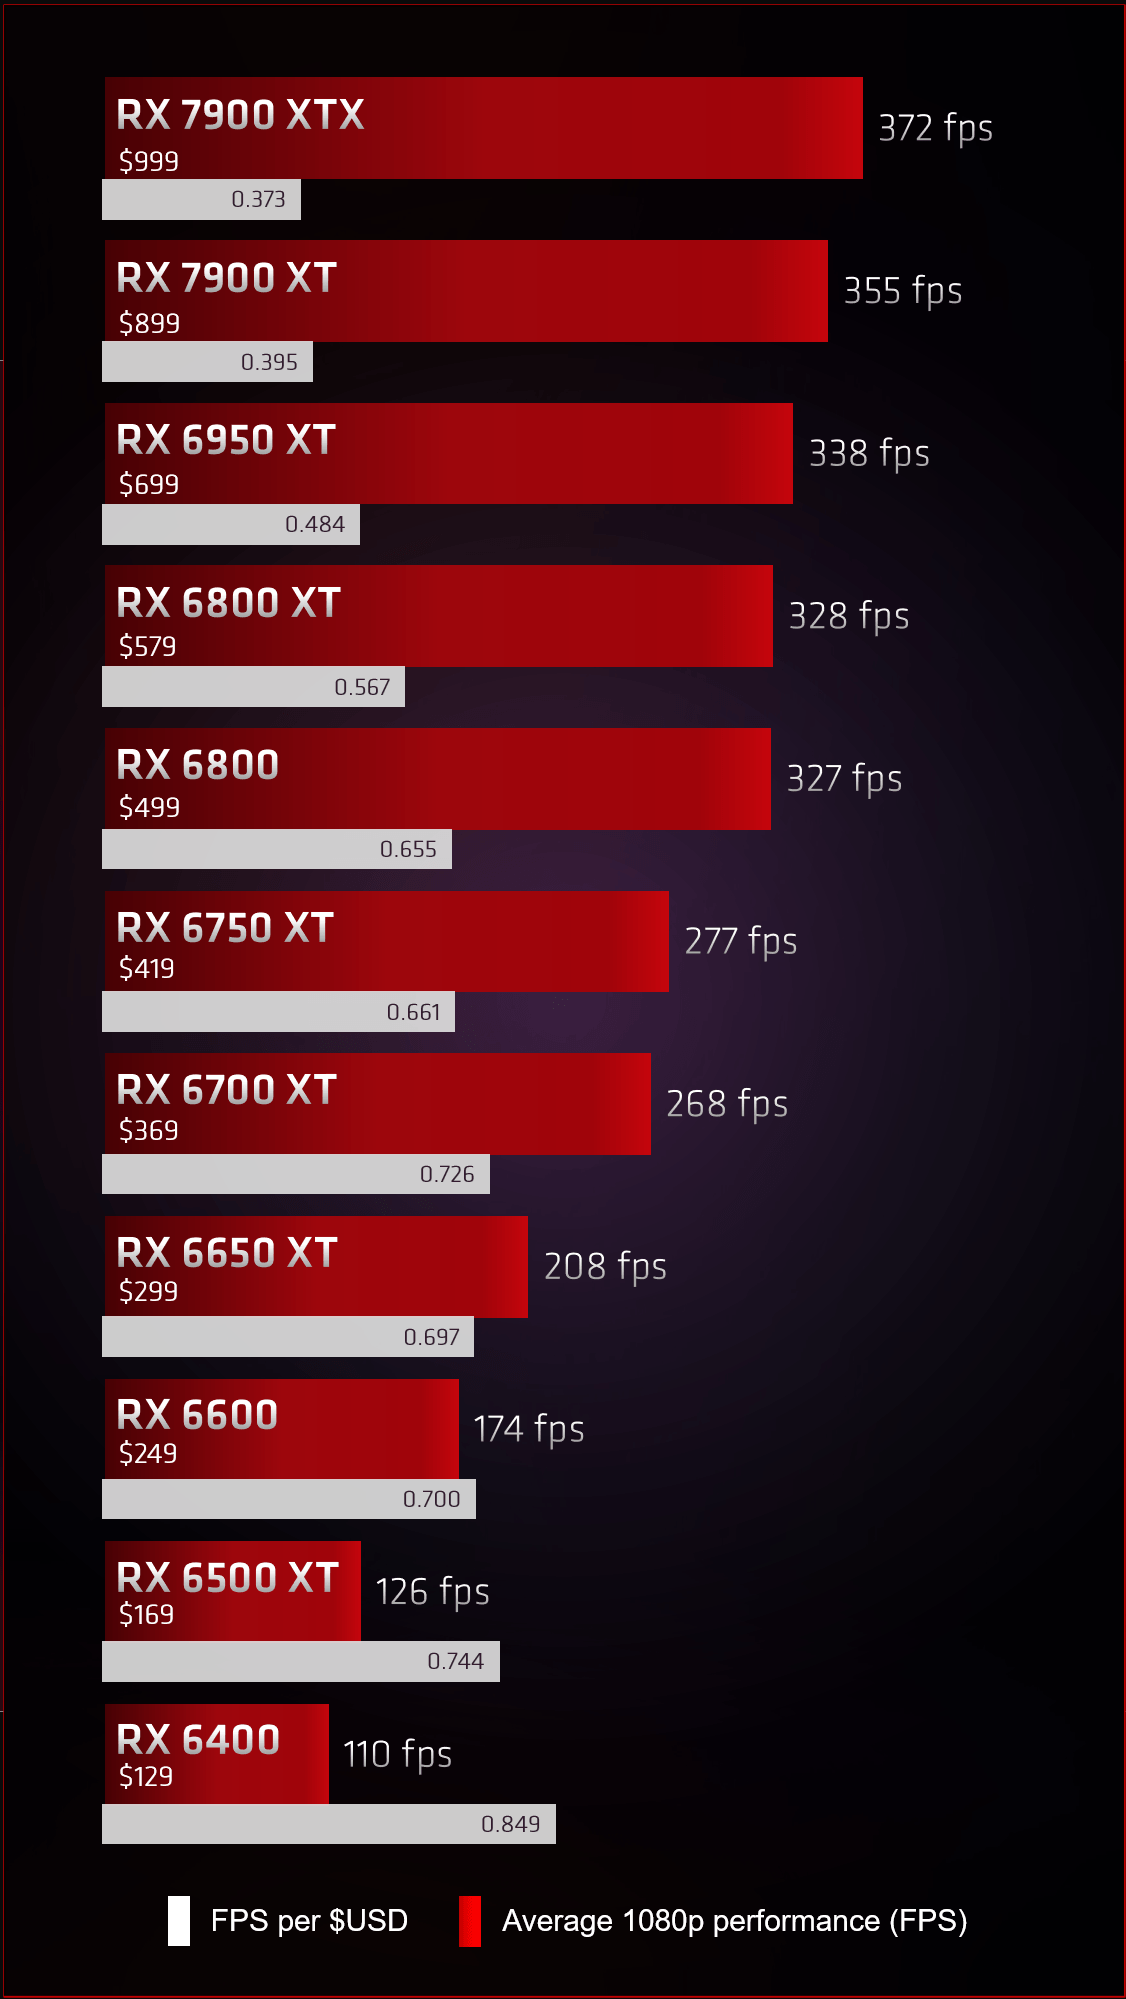 Launching Today: AMD's Radeon RX 6900 XT - A Whole Lot of Radeon for $1000